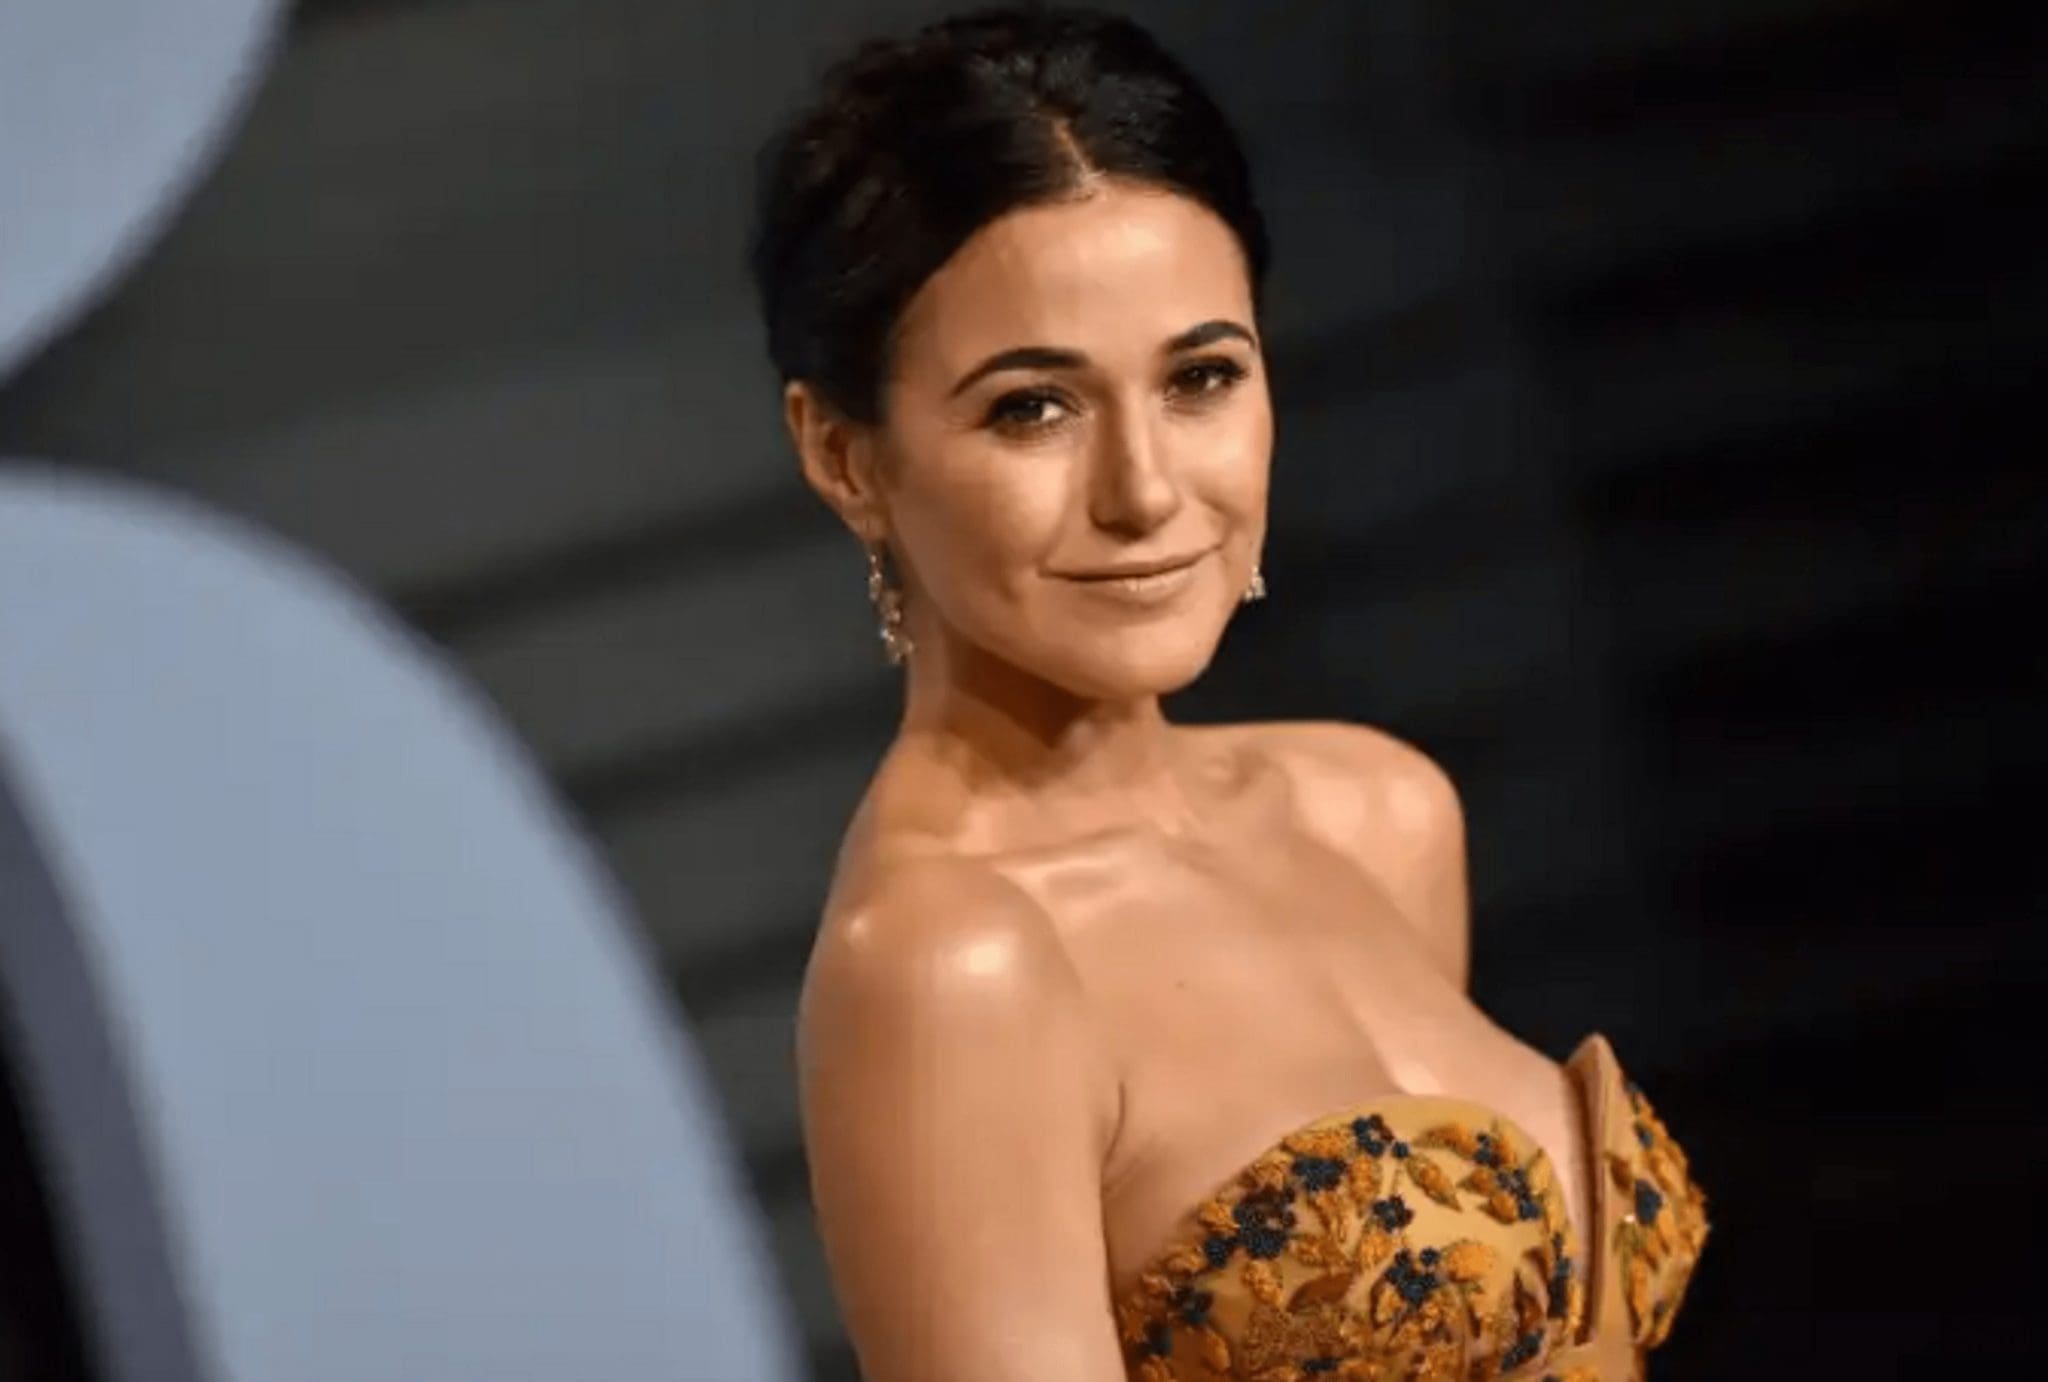 Emmanuelle Chriqui Blew Everyone Away While On Vacation In Mykonos, Greece, By Donning A Daring Blue Bikini